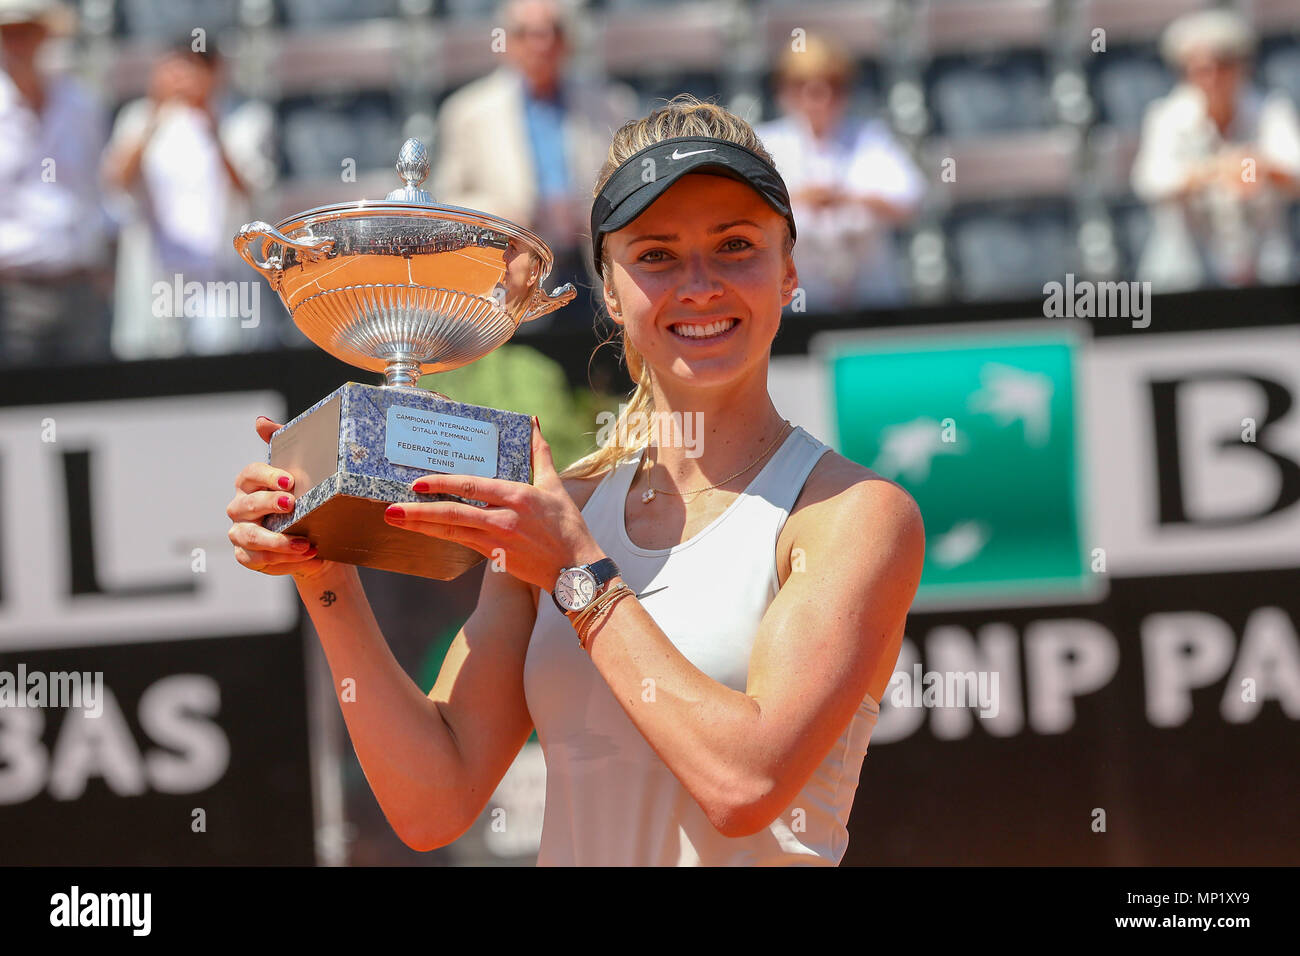 foro-italico-rome-italy-20th-may-2018-italian-open-tennis-finals-day-elina-svitolina-ukr-celebrates-with-trophy-after-winning-the-final-match-againt-simona-halep-rou-6-0-6-4-credit-action-plus-sportsalamy-live-news-MP1XY9.jpg